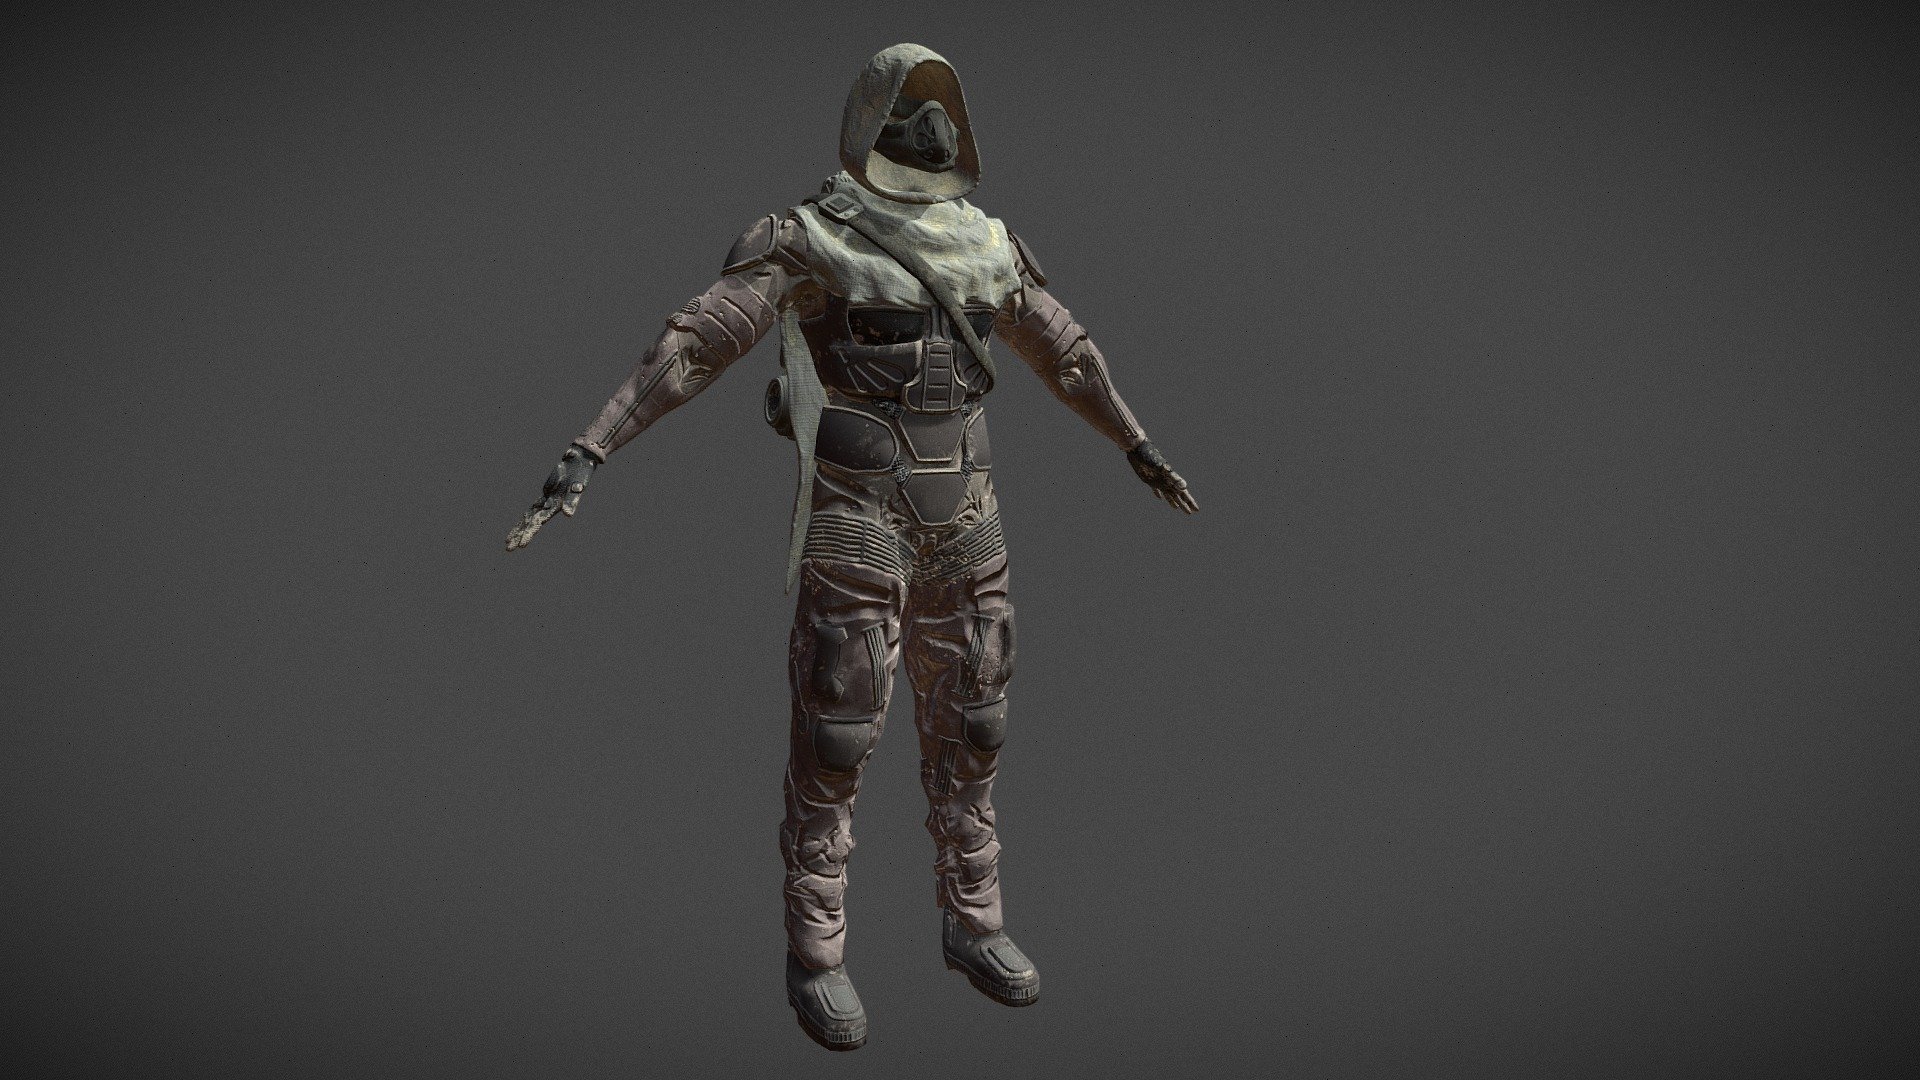 Dune Fremen Stillsuit + Accessories, inspired from the new Dune 2020 Film - Armor Model/Texture work by Outworld Studios

Comes with
- Stillsuit
- Water Recycler
- Desert Hood
- Desert Shroud
- Fremen Kit Backpack

Must give credit to Outworld Studios if using this asset

Show support by joining my discord: https://discord.gg/EgWSkp8Cxn

Portoflio: https://www.artstation.com/outworldstudios - Dune Fremen Stillsuit + Accessories - Buy Royalty Free 3D model by Outworld Studios (@outworldstudios) 3d model